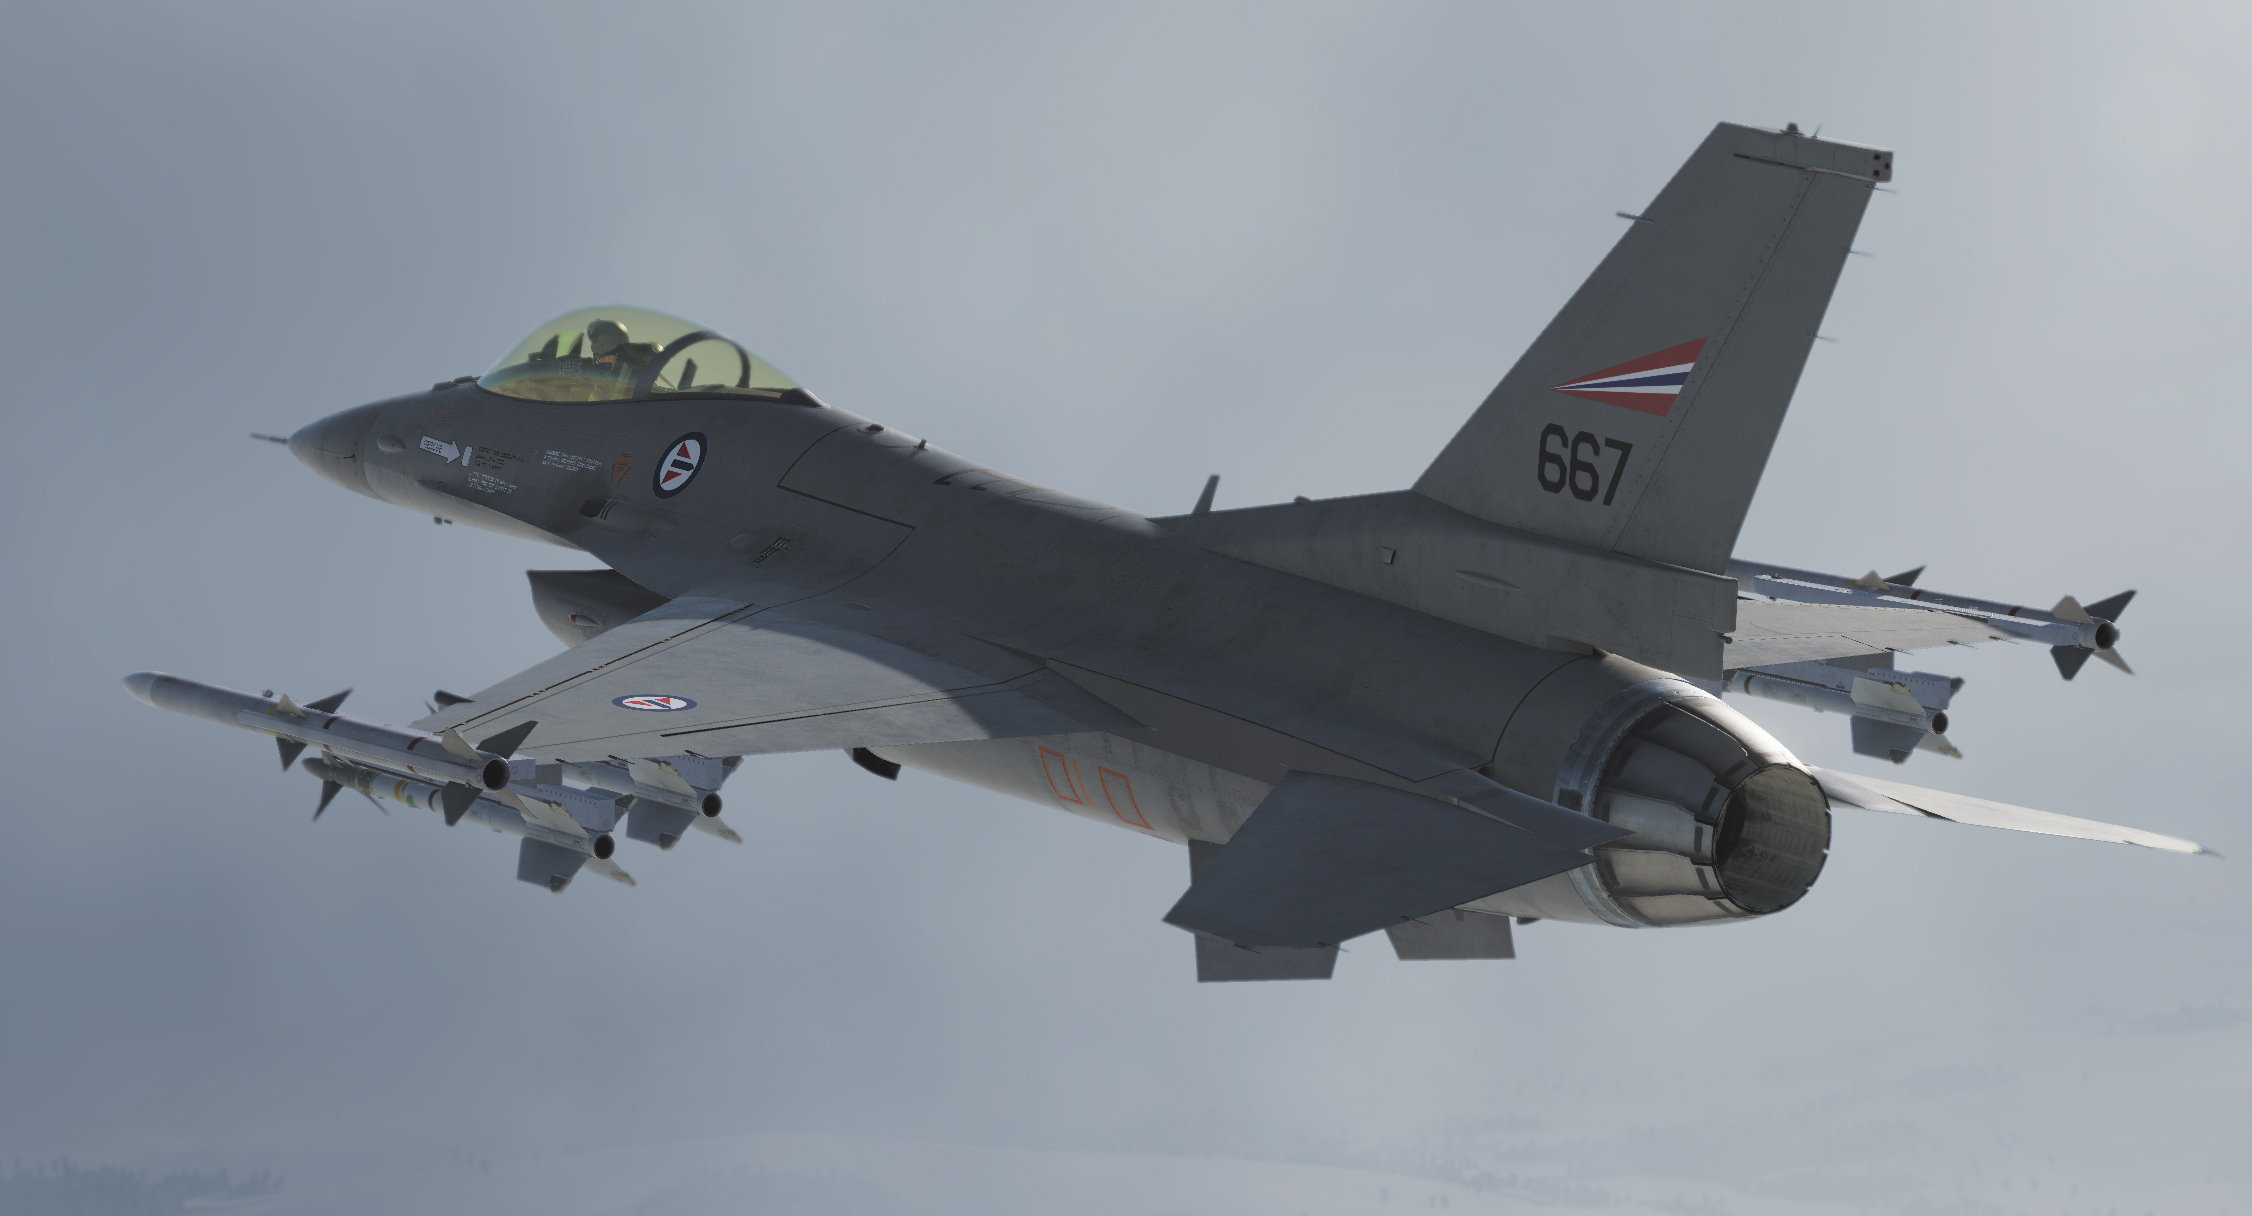 [UPDATED] RNoAF F-16C 667 Livery